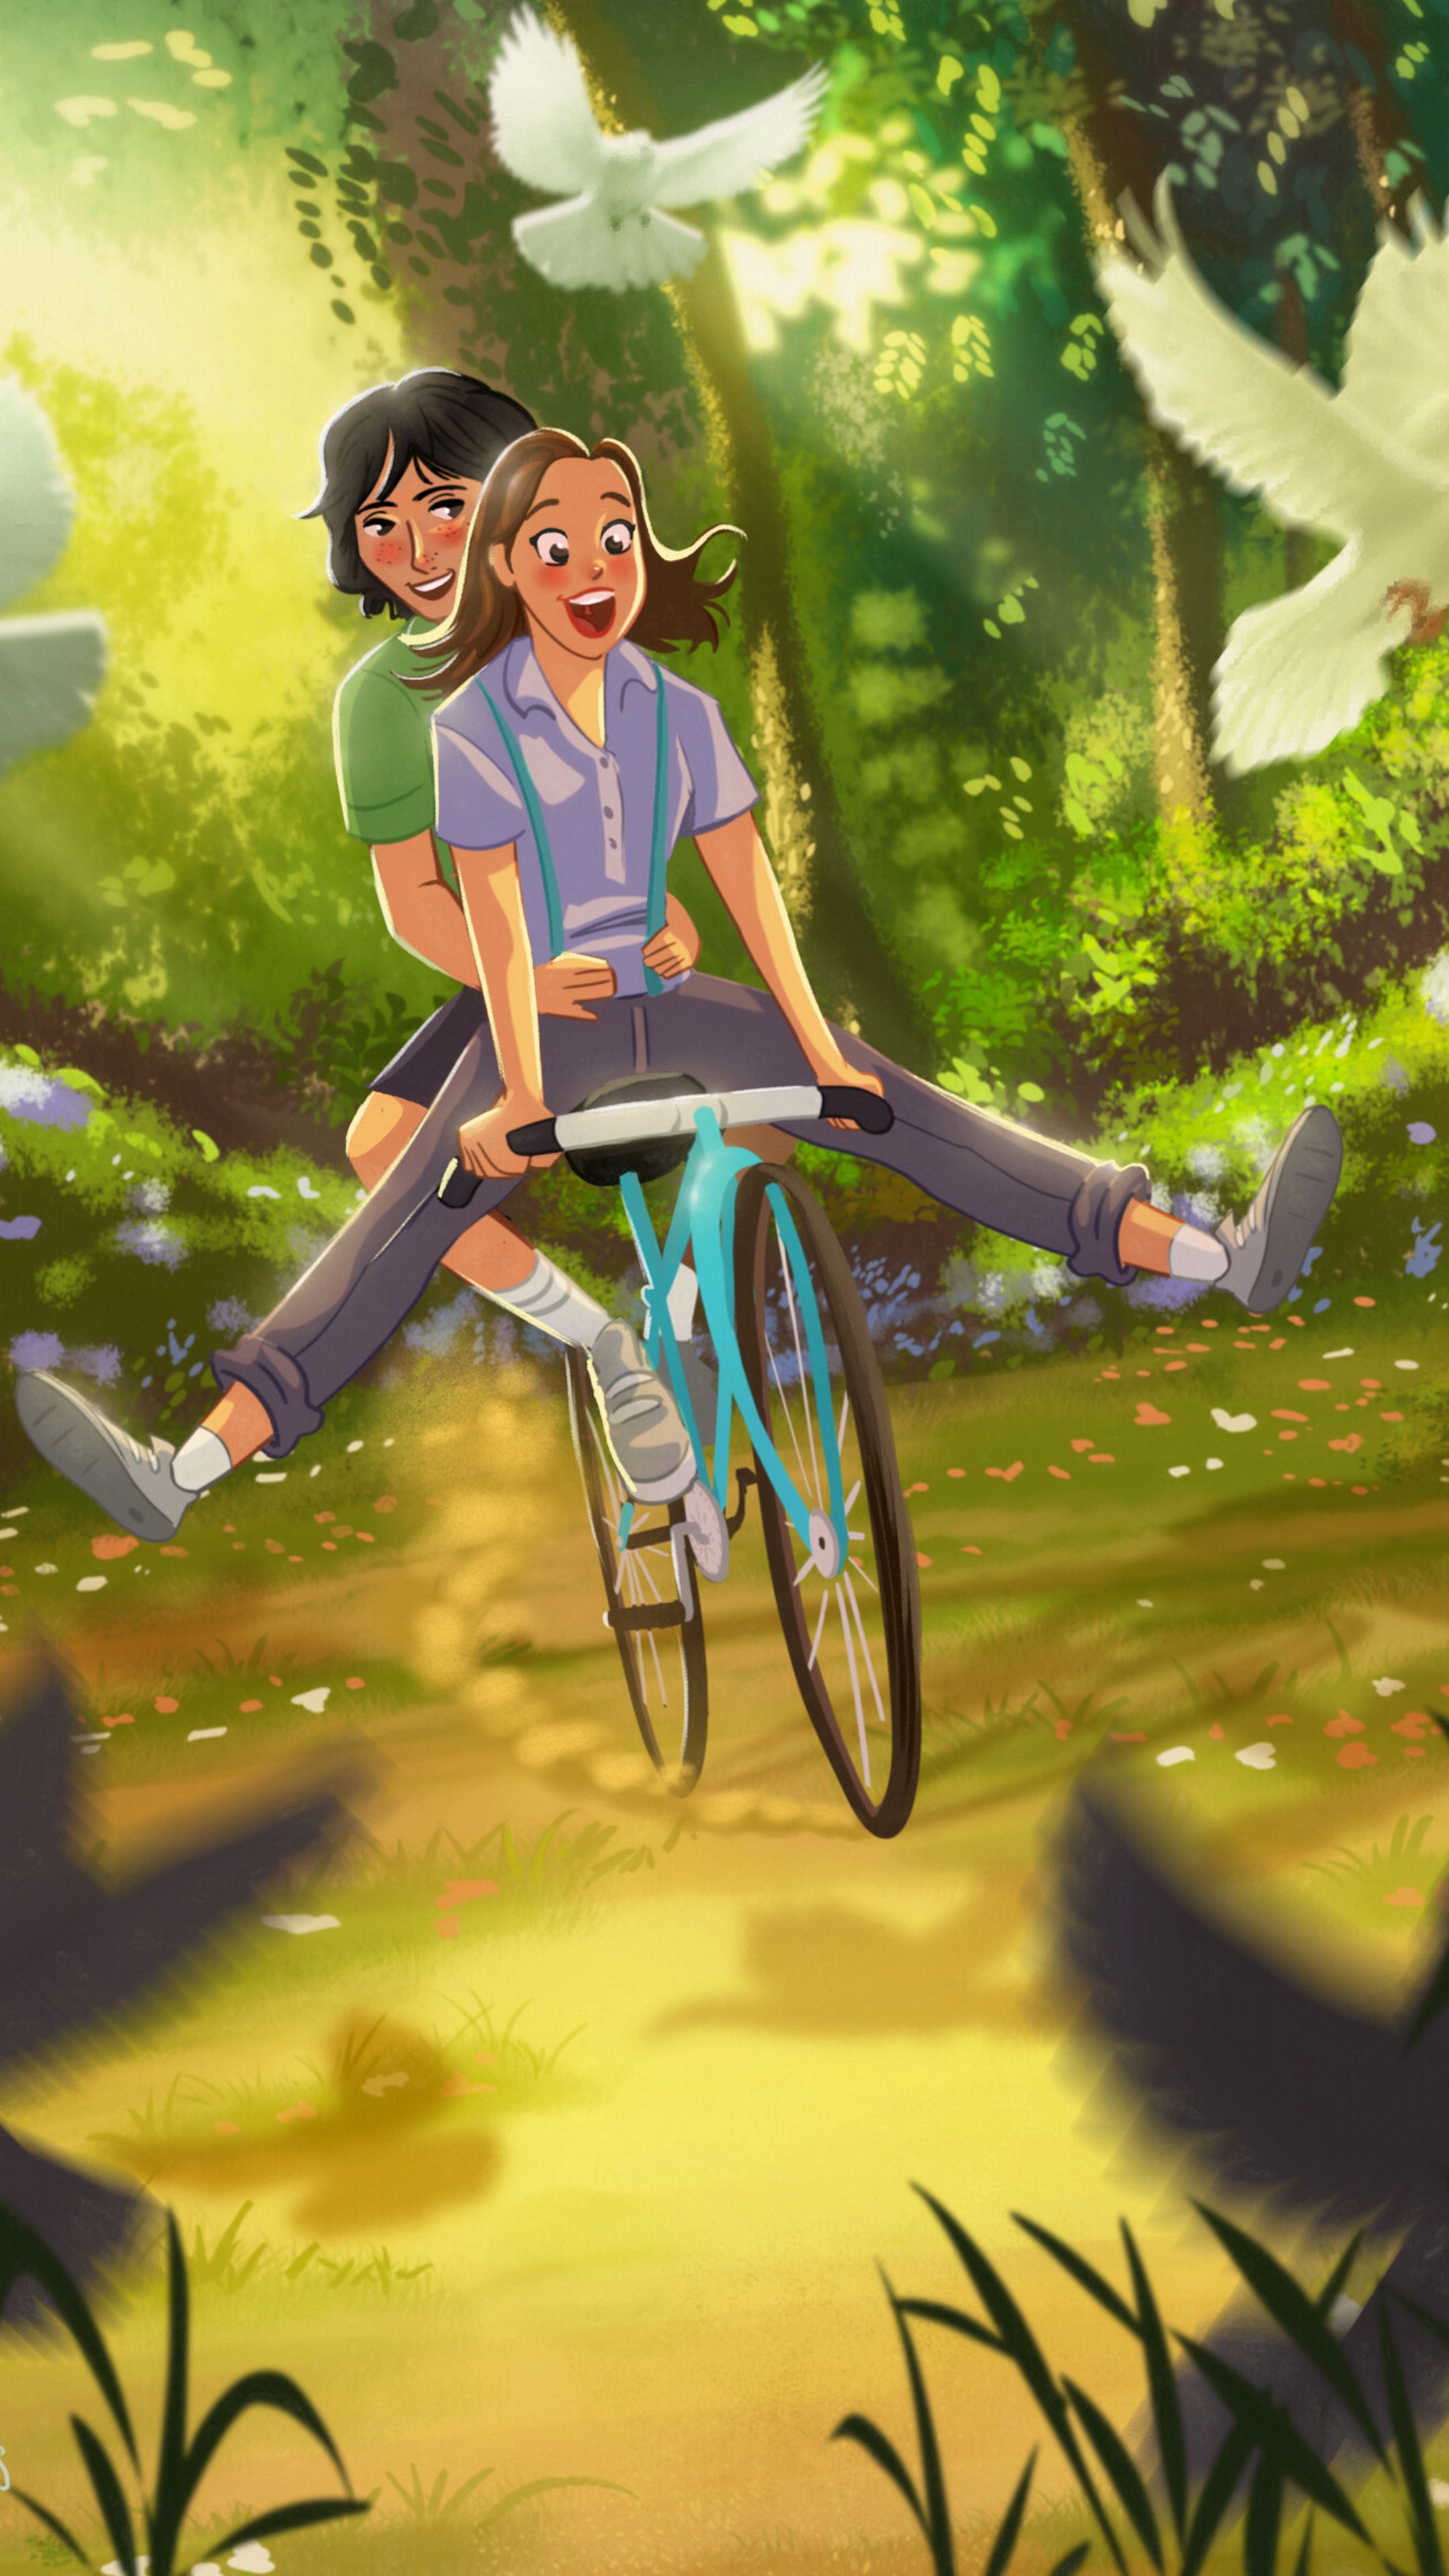 Download wallpaper 2160x3840 couple, bicycle, love, romance, art, happiness  samsung galaxy s4, s5, note, sony xperia z, z1, z2, z3, htc one, lenovo  vibe hd background